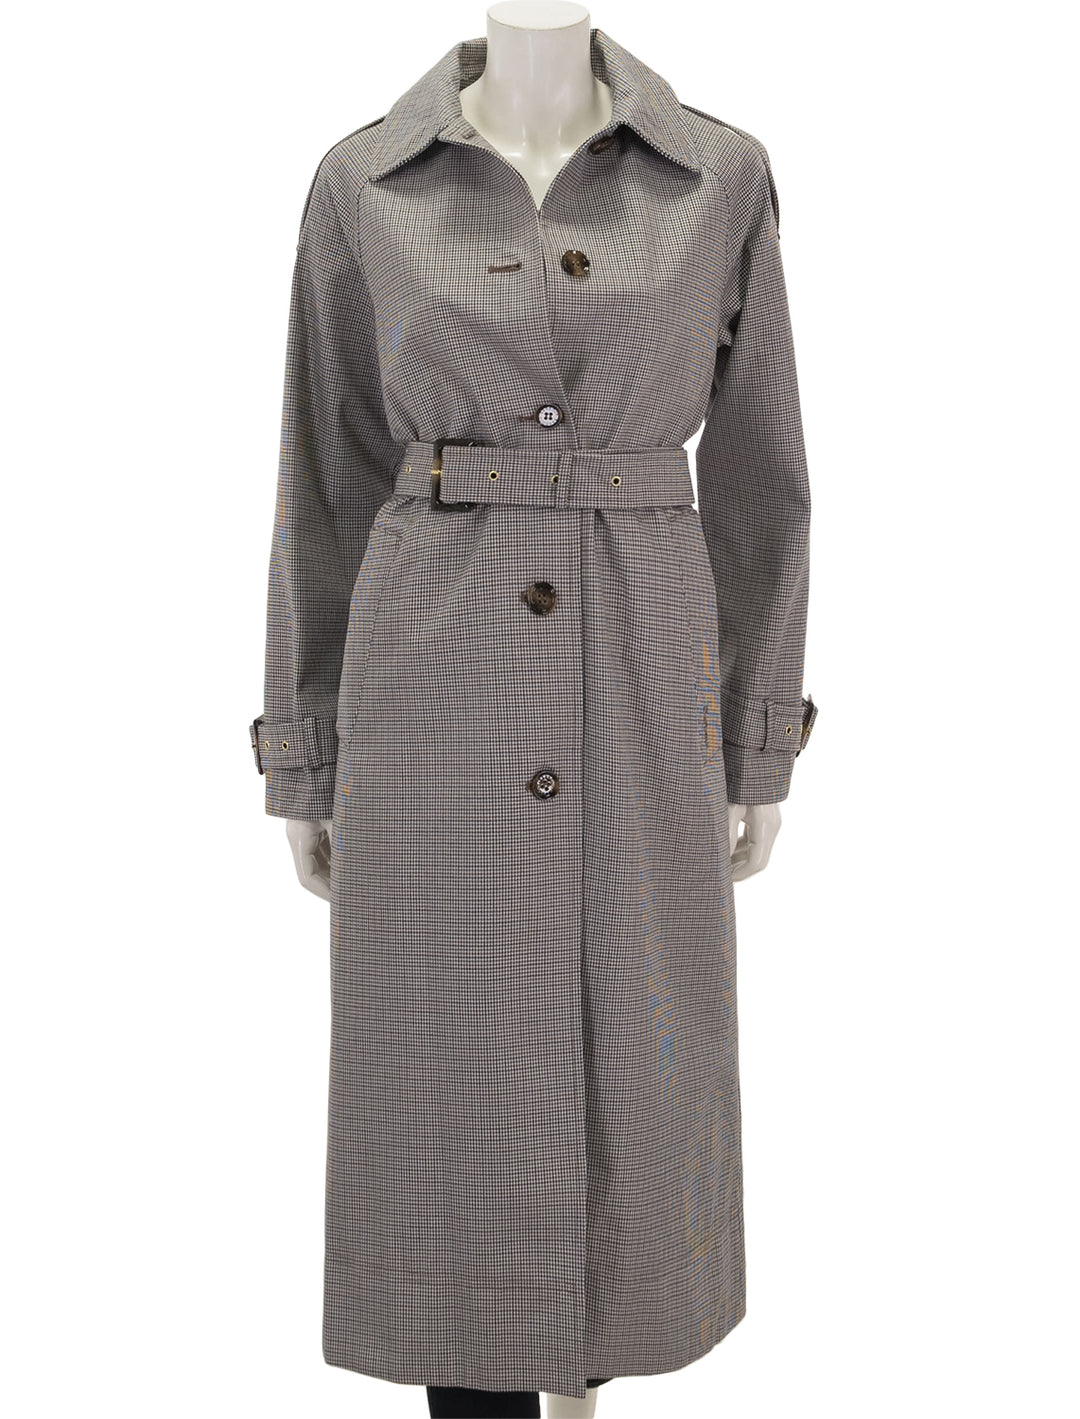 Front view of Barbour's marie check showerproof mini check trench, buttoned.